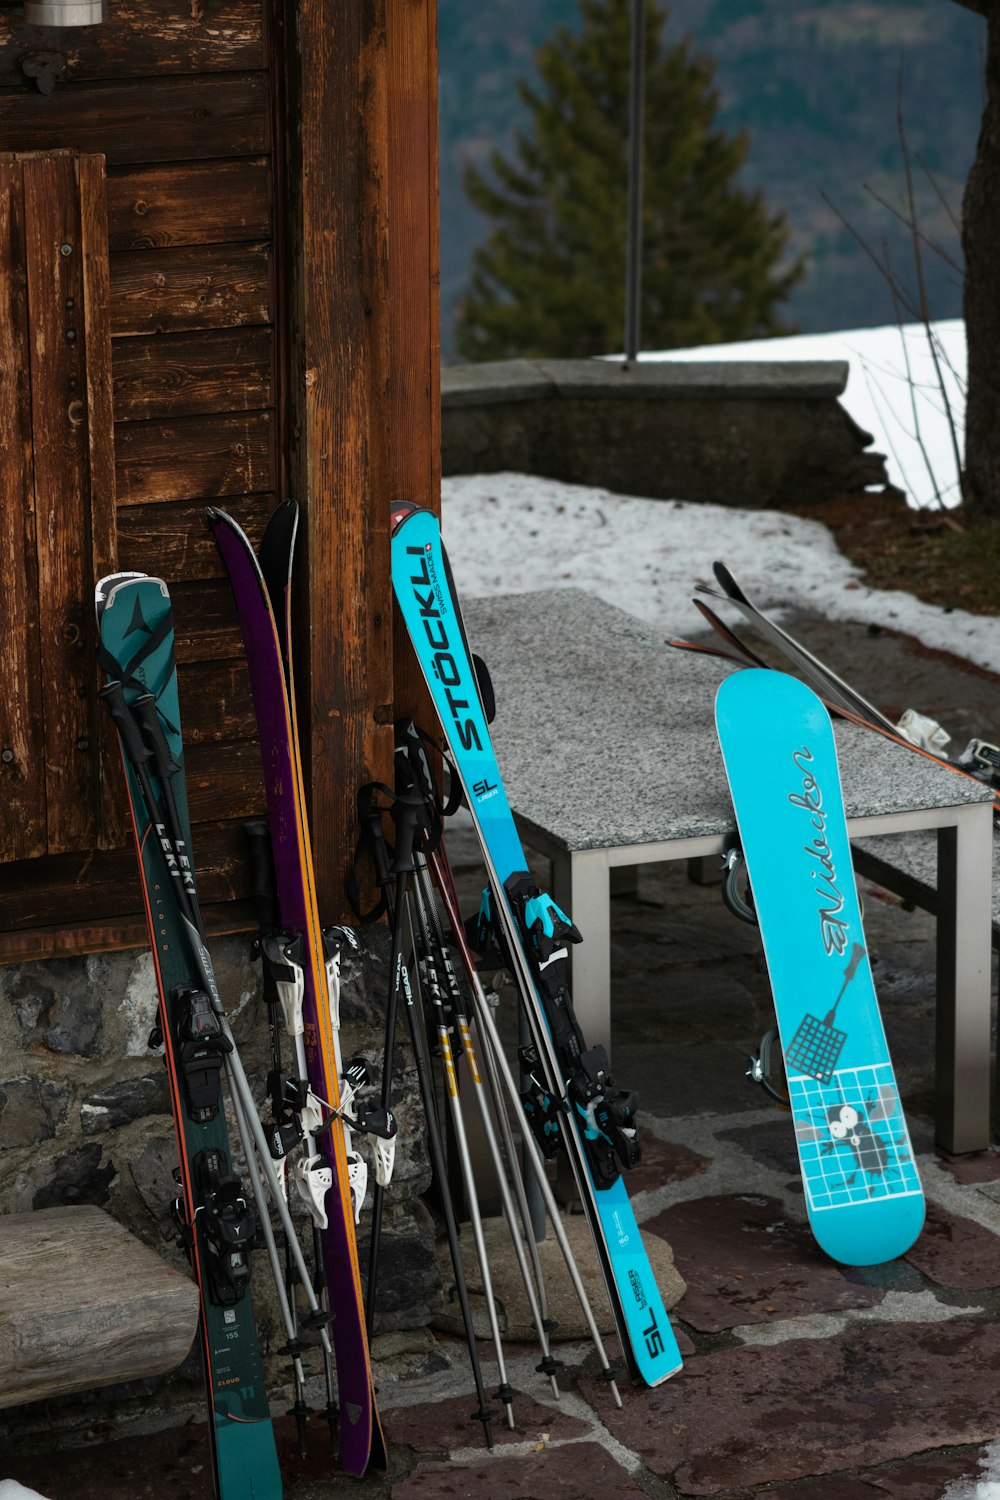 a group of skis and ski poles sitting next to a table